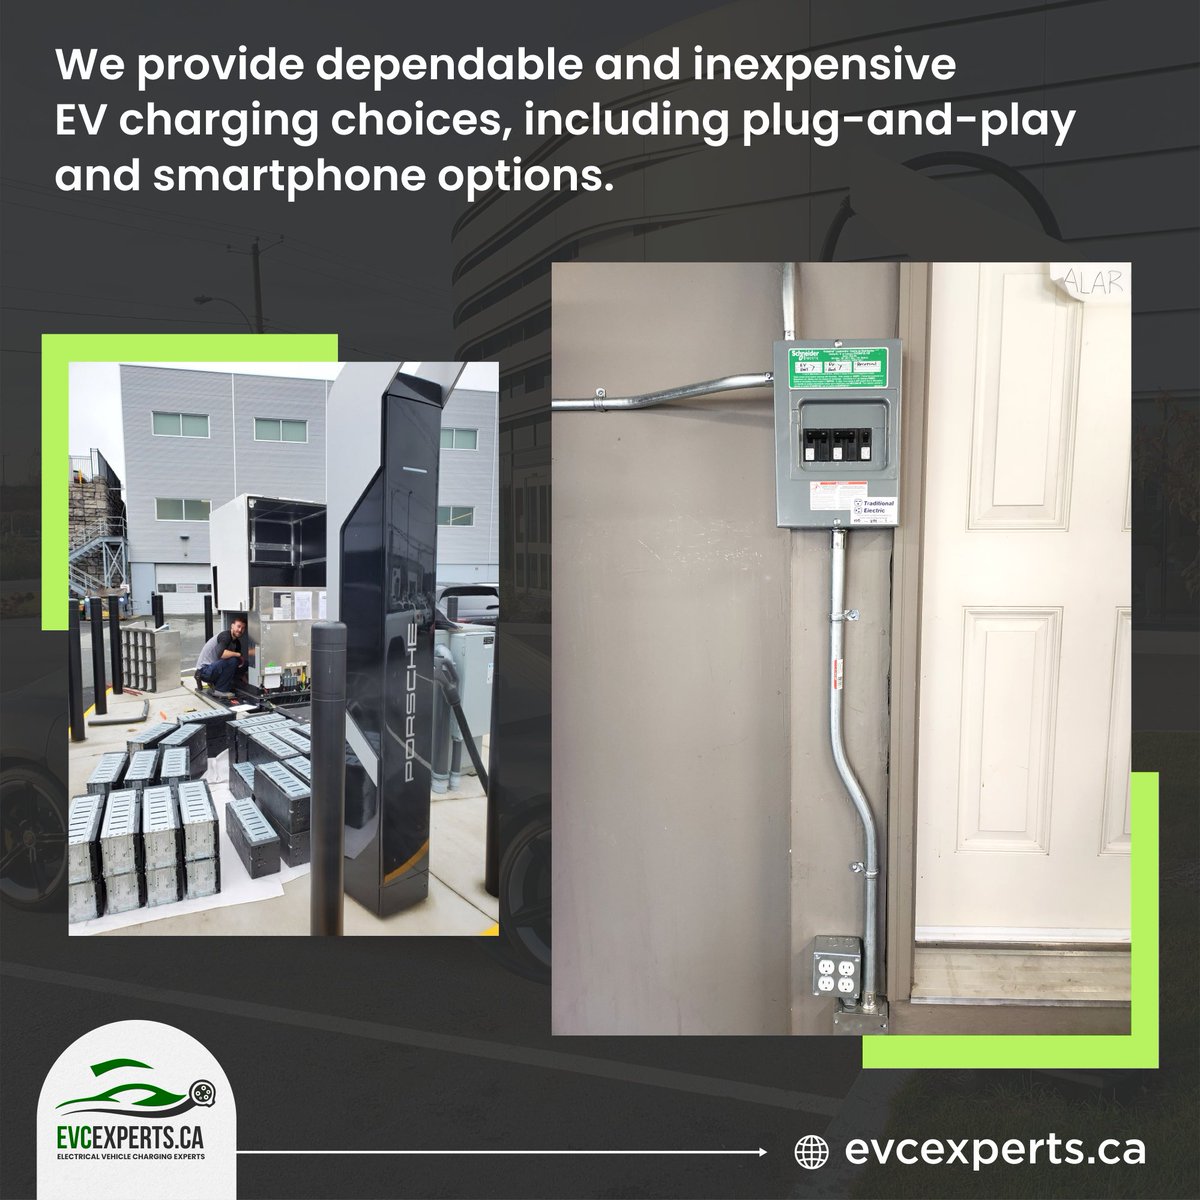 You can #charge your car more quickly thanks to our energy management system without having to upgrade your electrical panel or utility, which will save you thousands of dollars. Additionally, you can plan your #EVcharge for times when electricity is less expensive.

#Canada